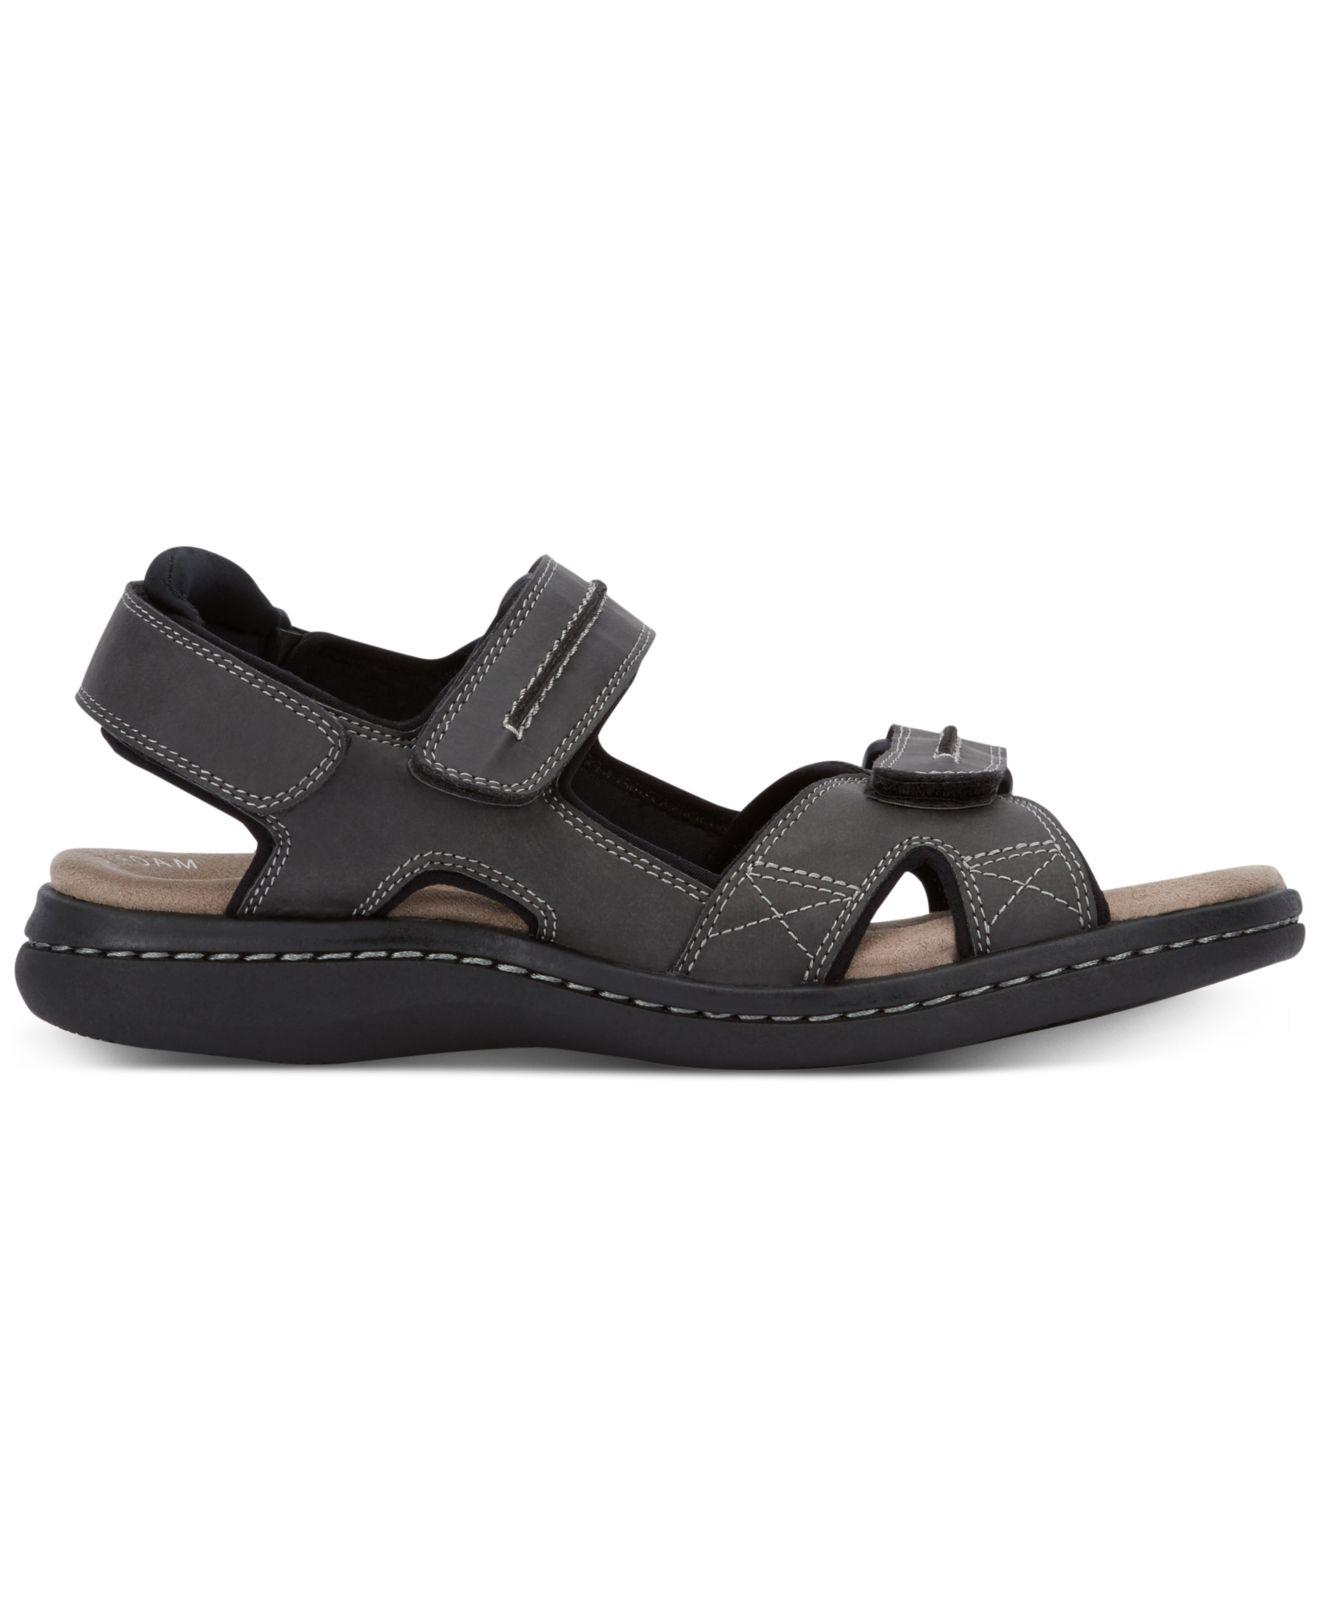 Dockers Rubber Newpage River Sandals in Grey (Gray) for Men - Lyst